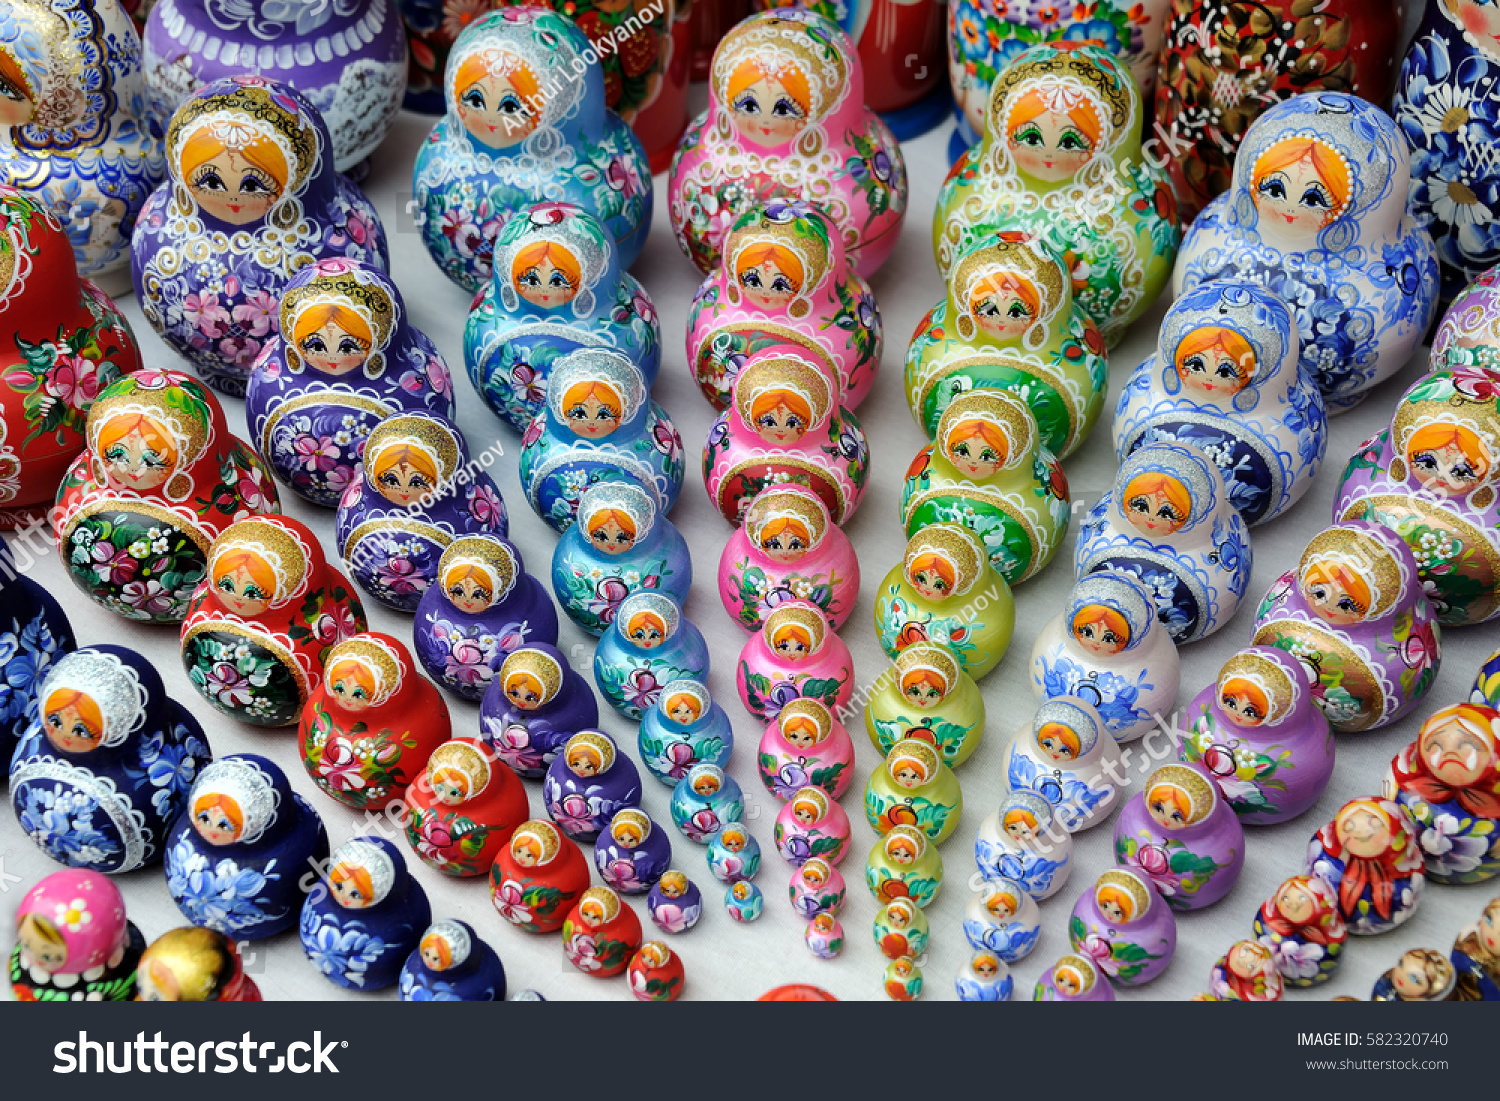 little russian stacking dolls